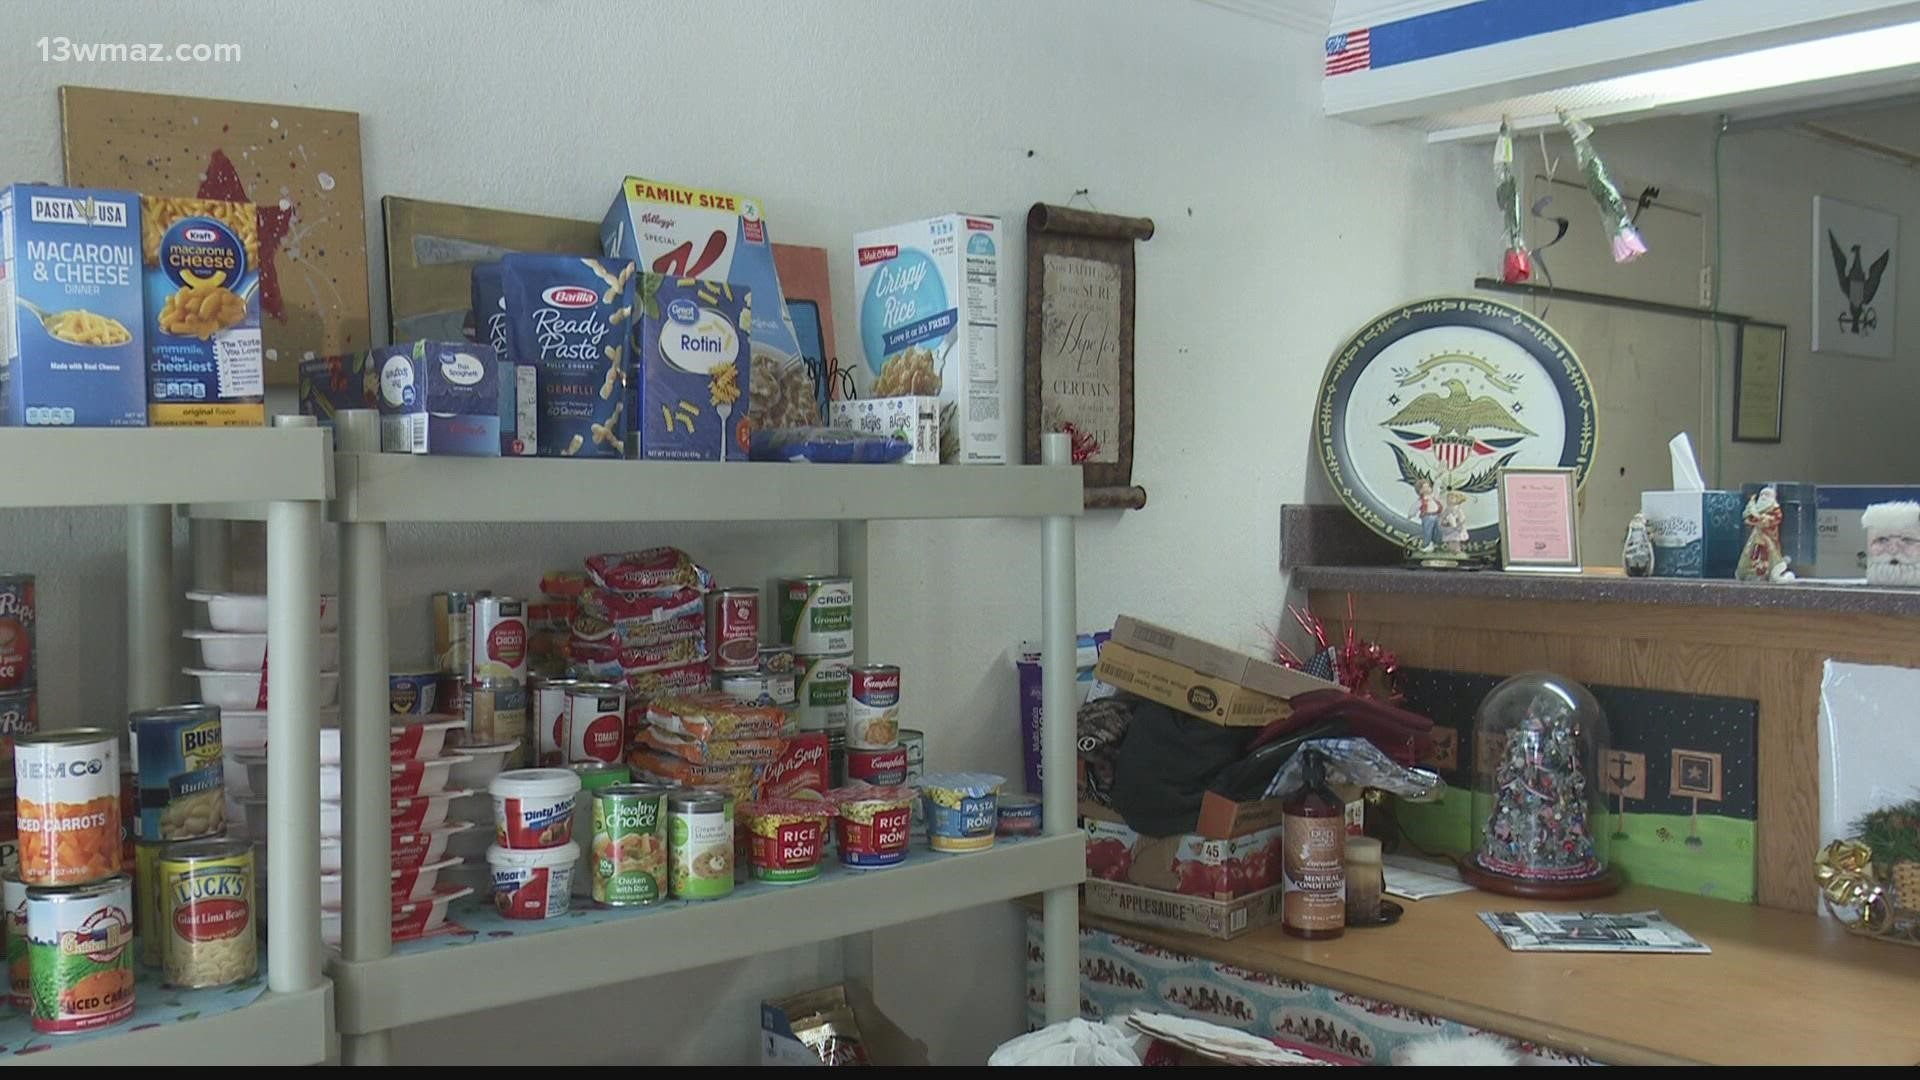 The thieves stole hygiene products and food that had been donated to the veterans.